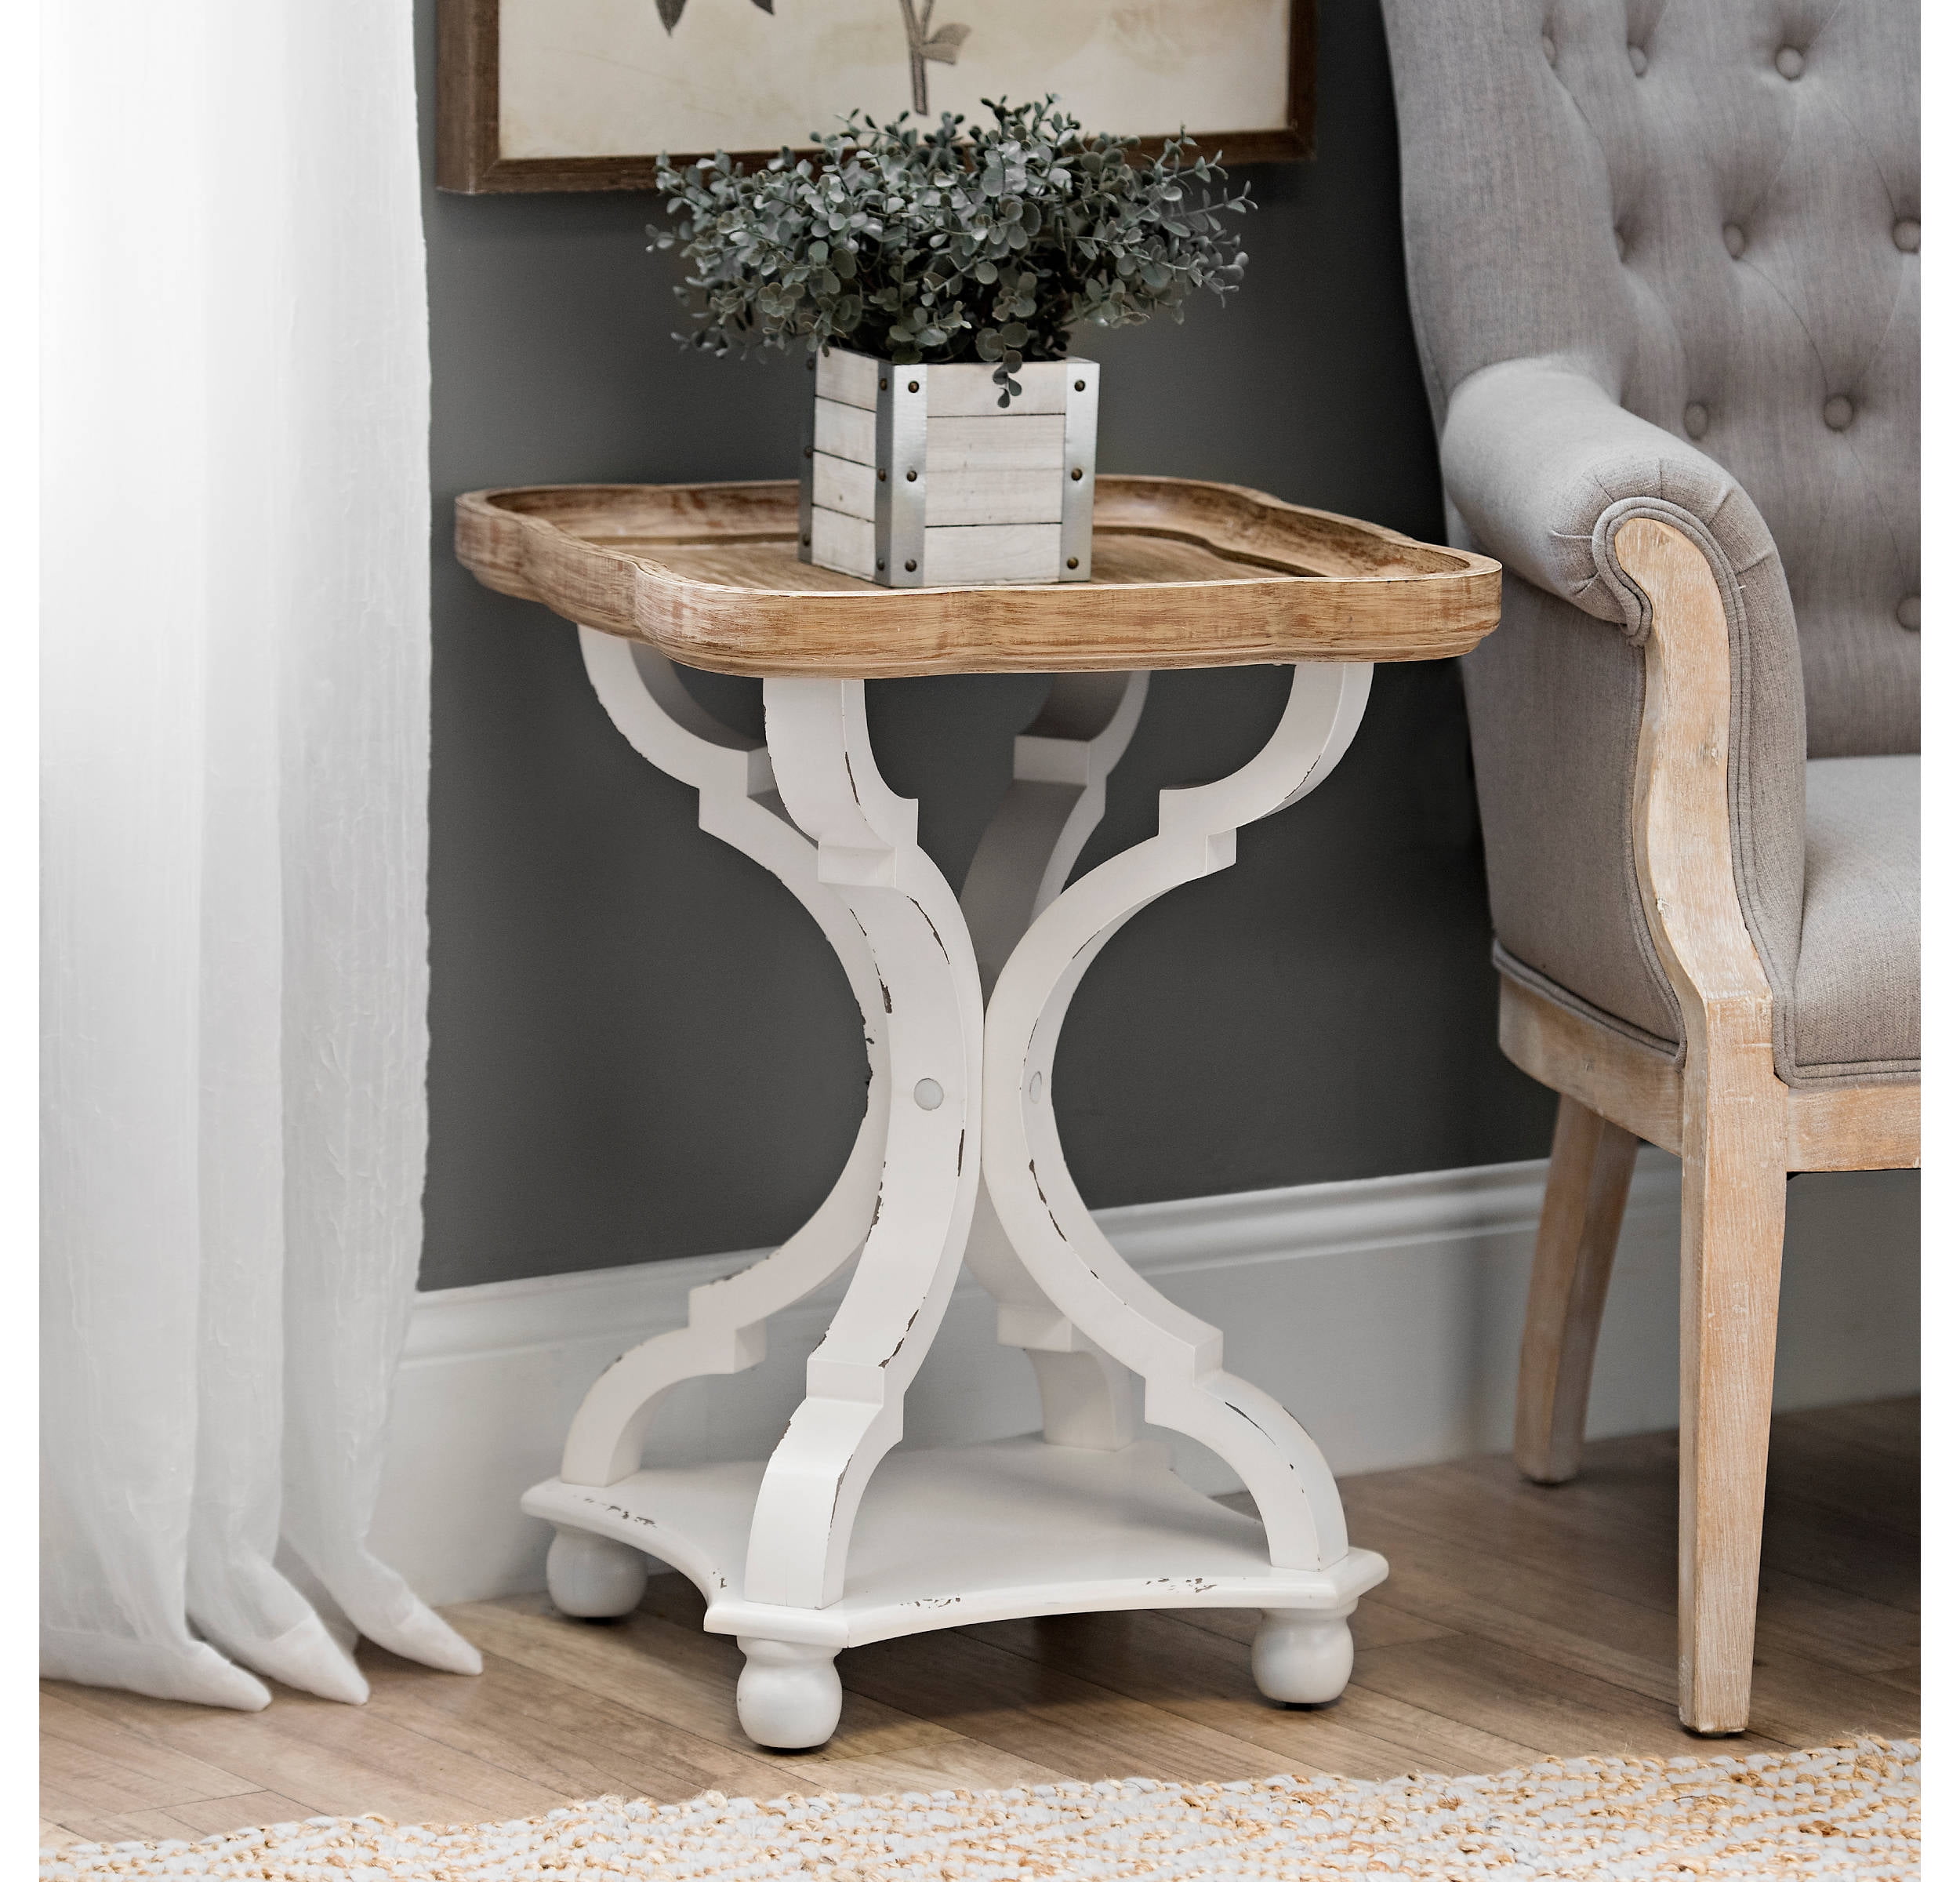 End Table Sofa Side Accent Display Shelves Farmhouse Rustic Distressed White NEW 